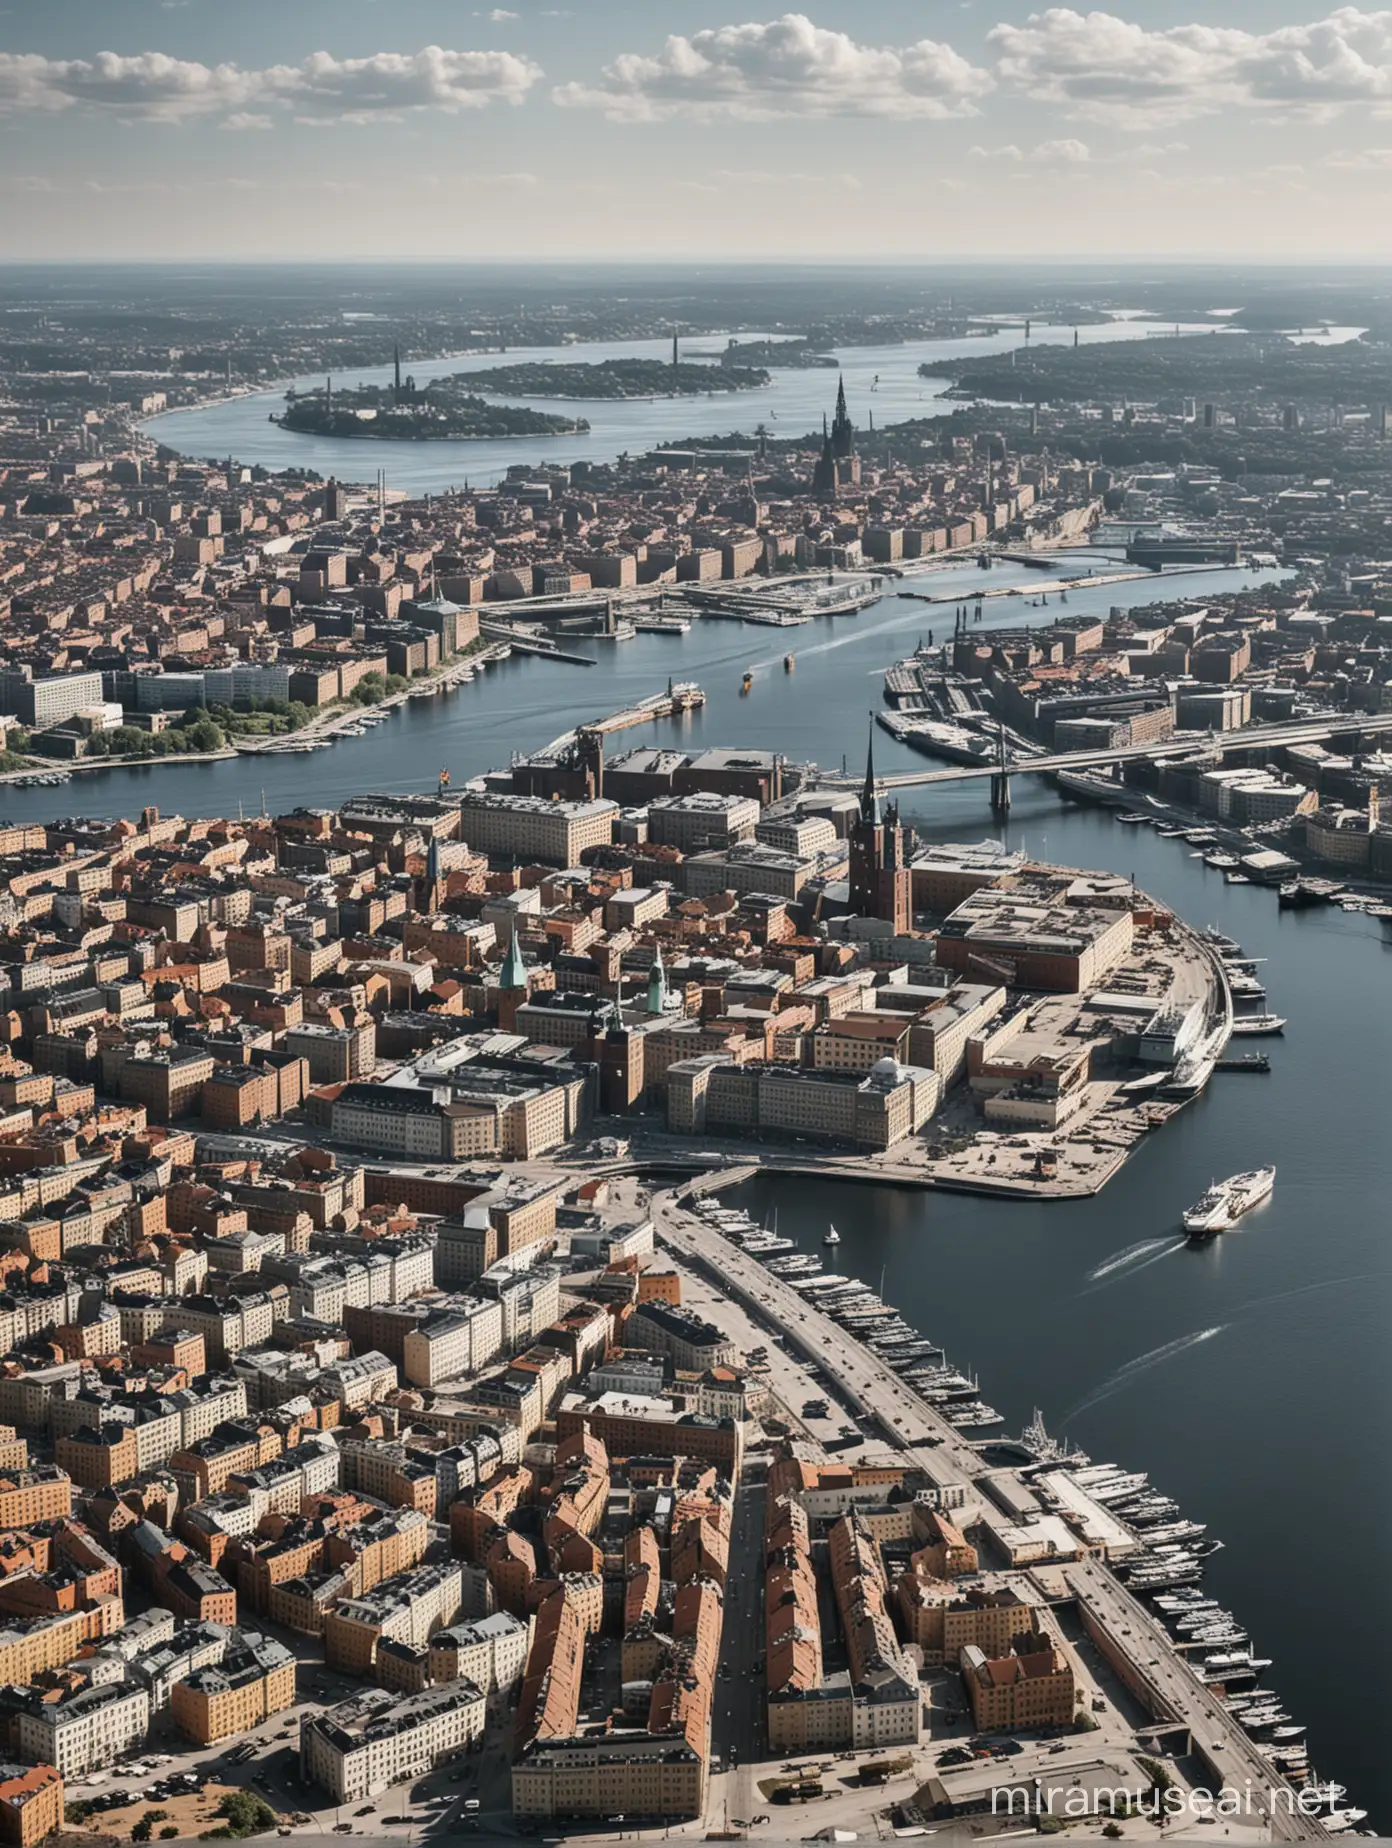 Sunny 1950s Stockholm Industrial Cityscape Capital of Sweden